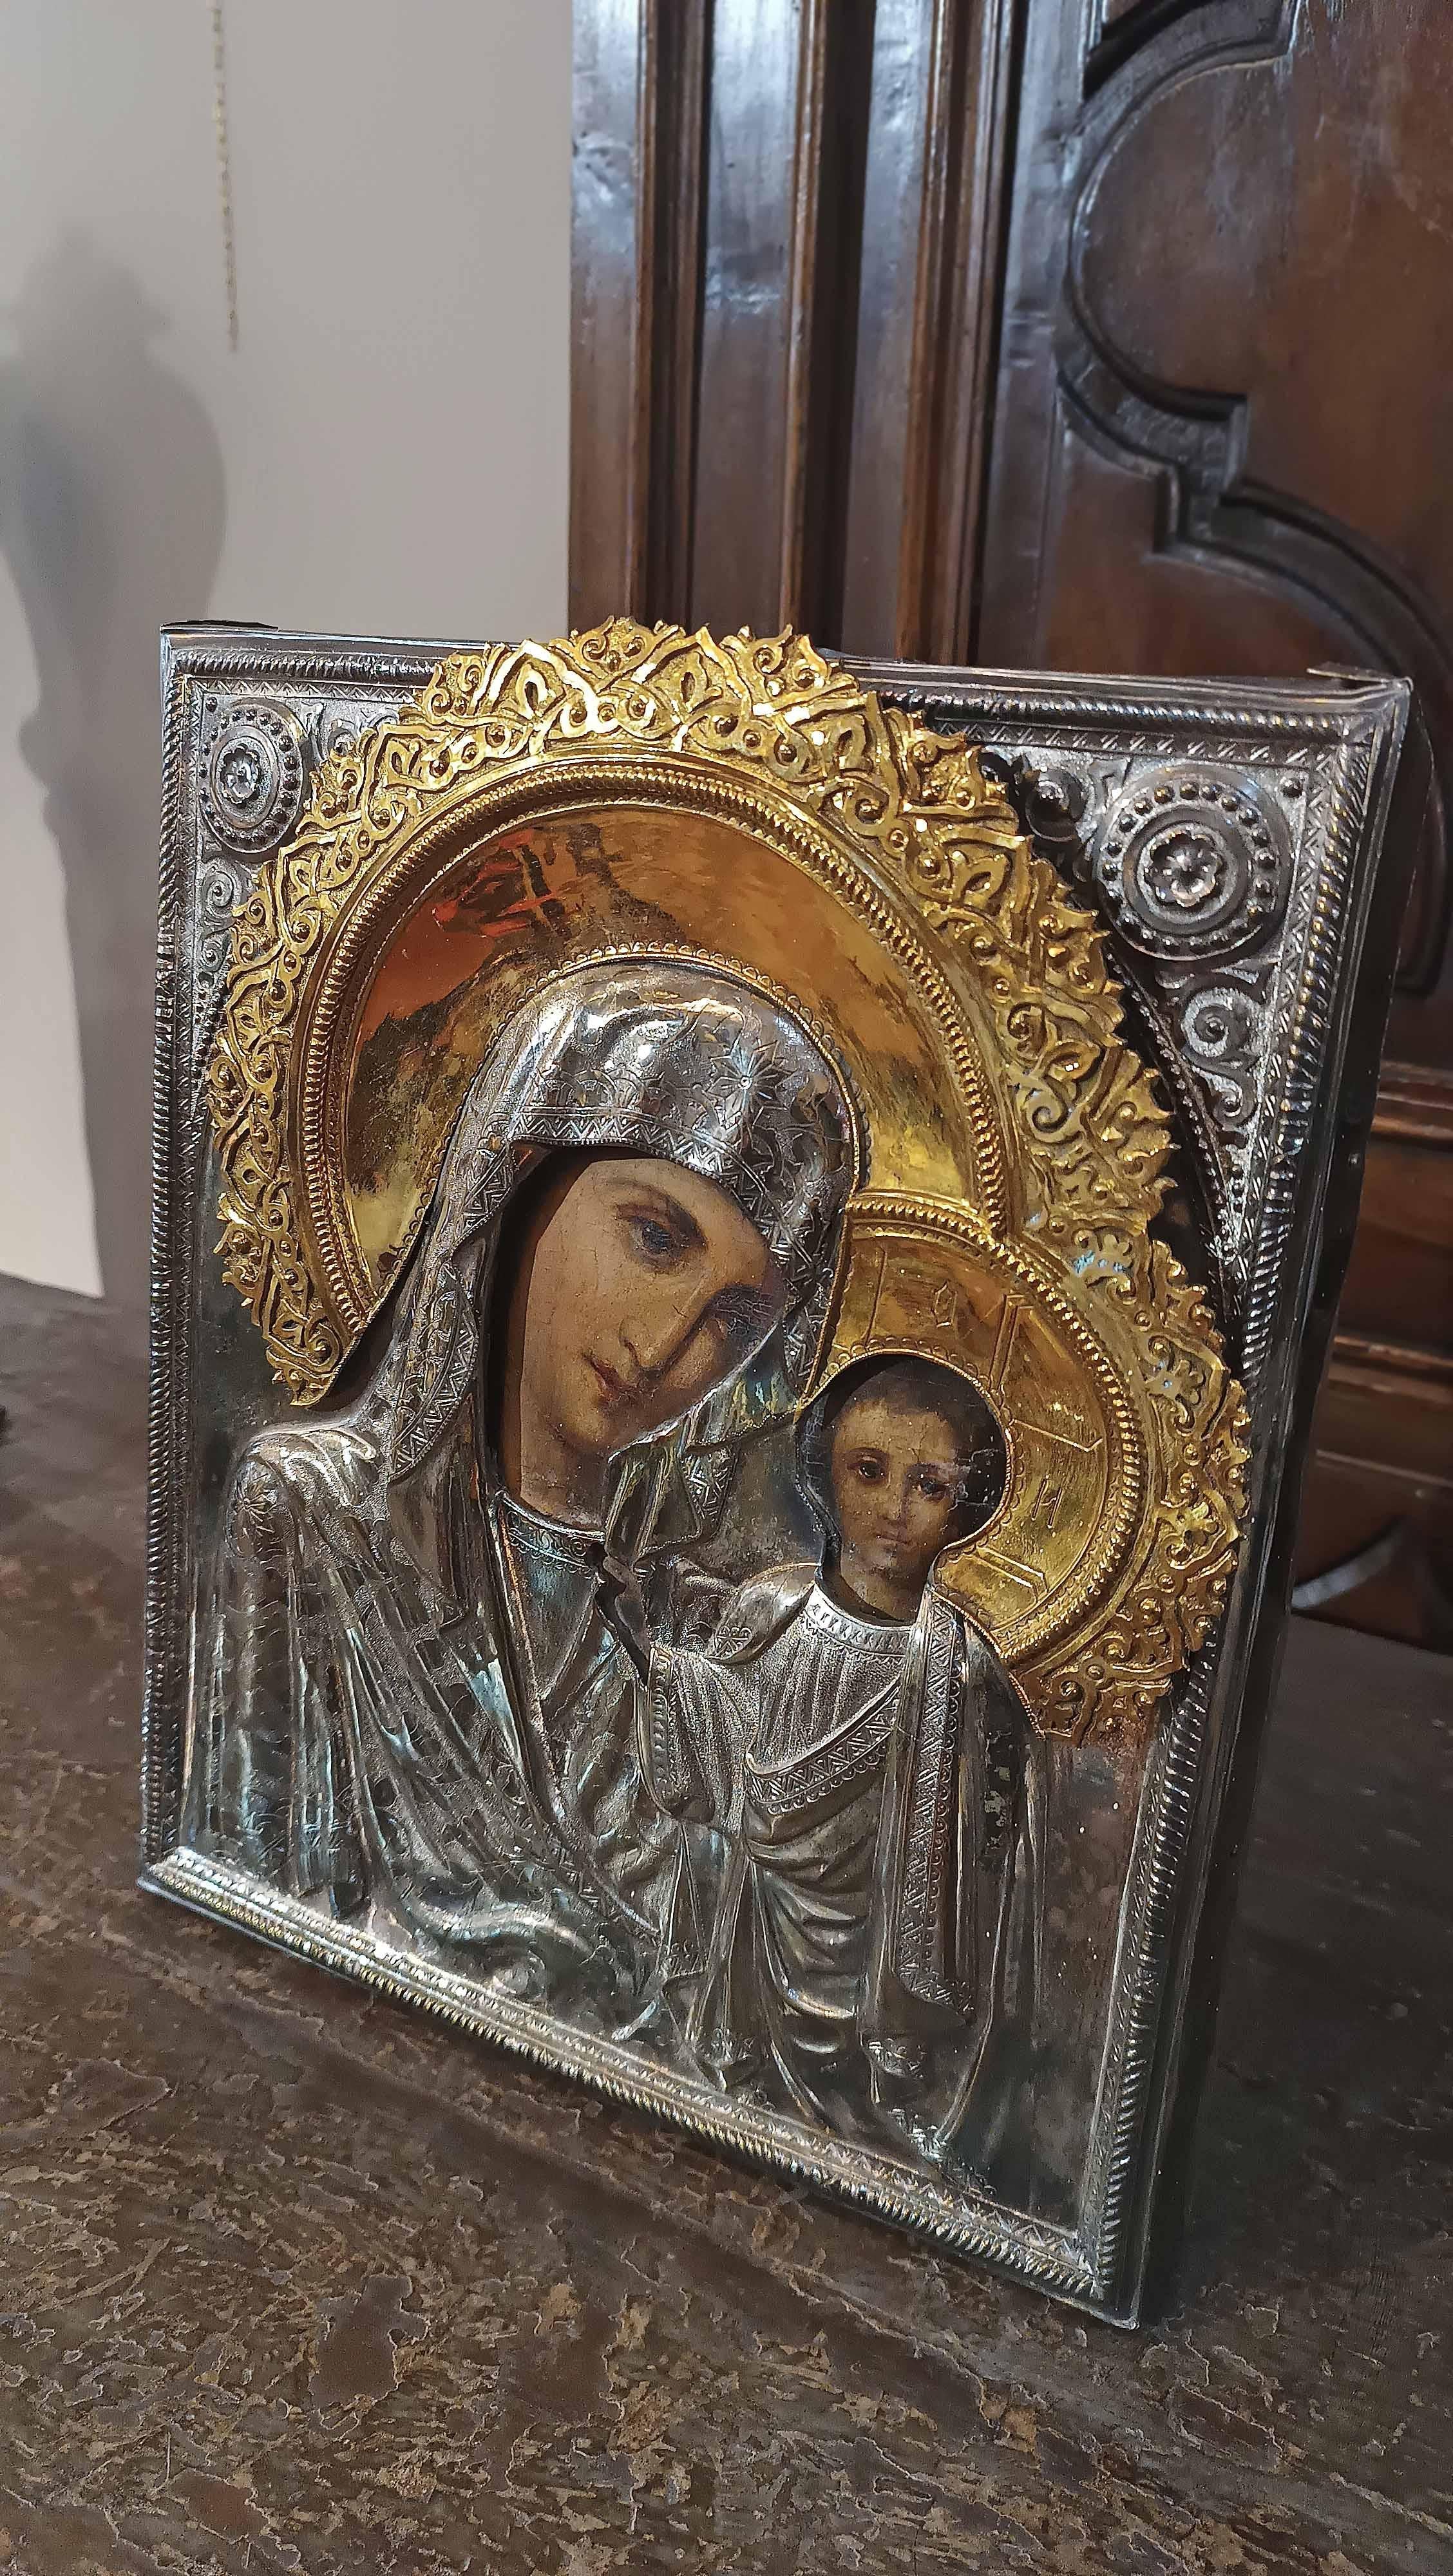 EARLY 19th CENTURY ICON WITH MADONNA AND CHILD  For Sale 1